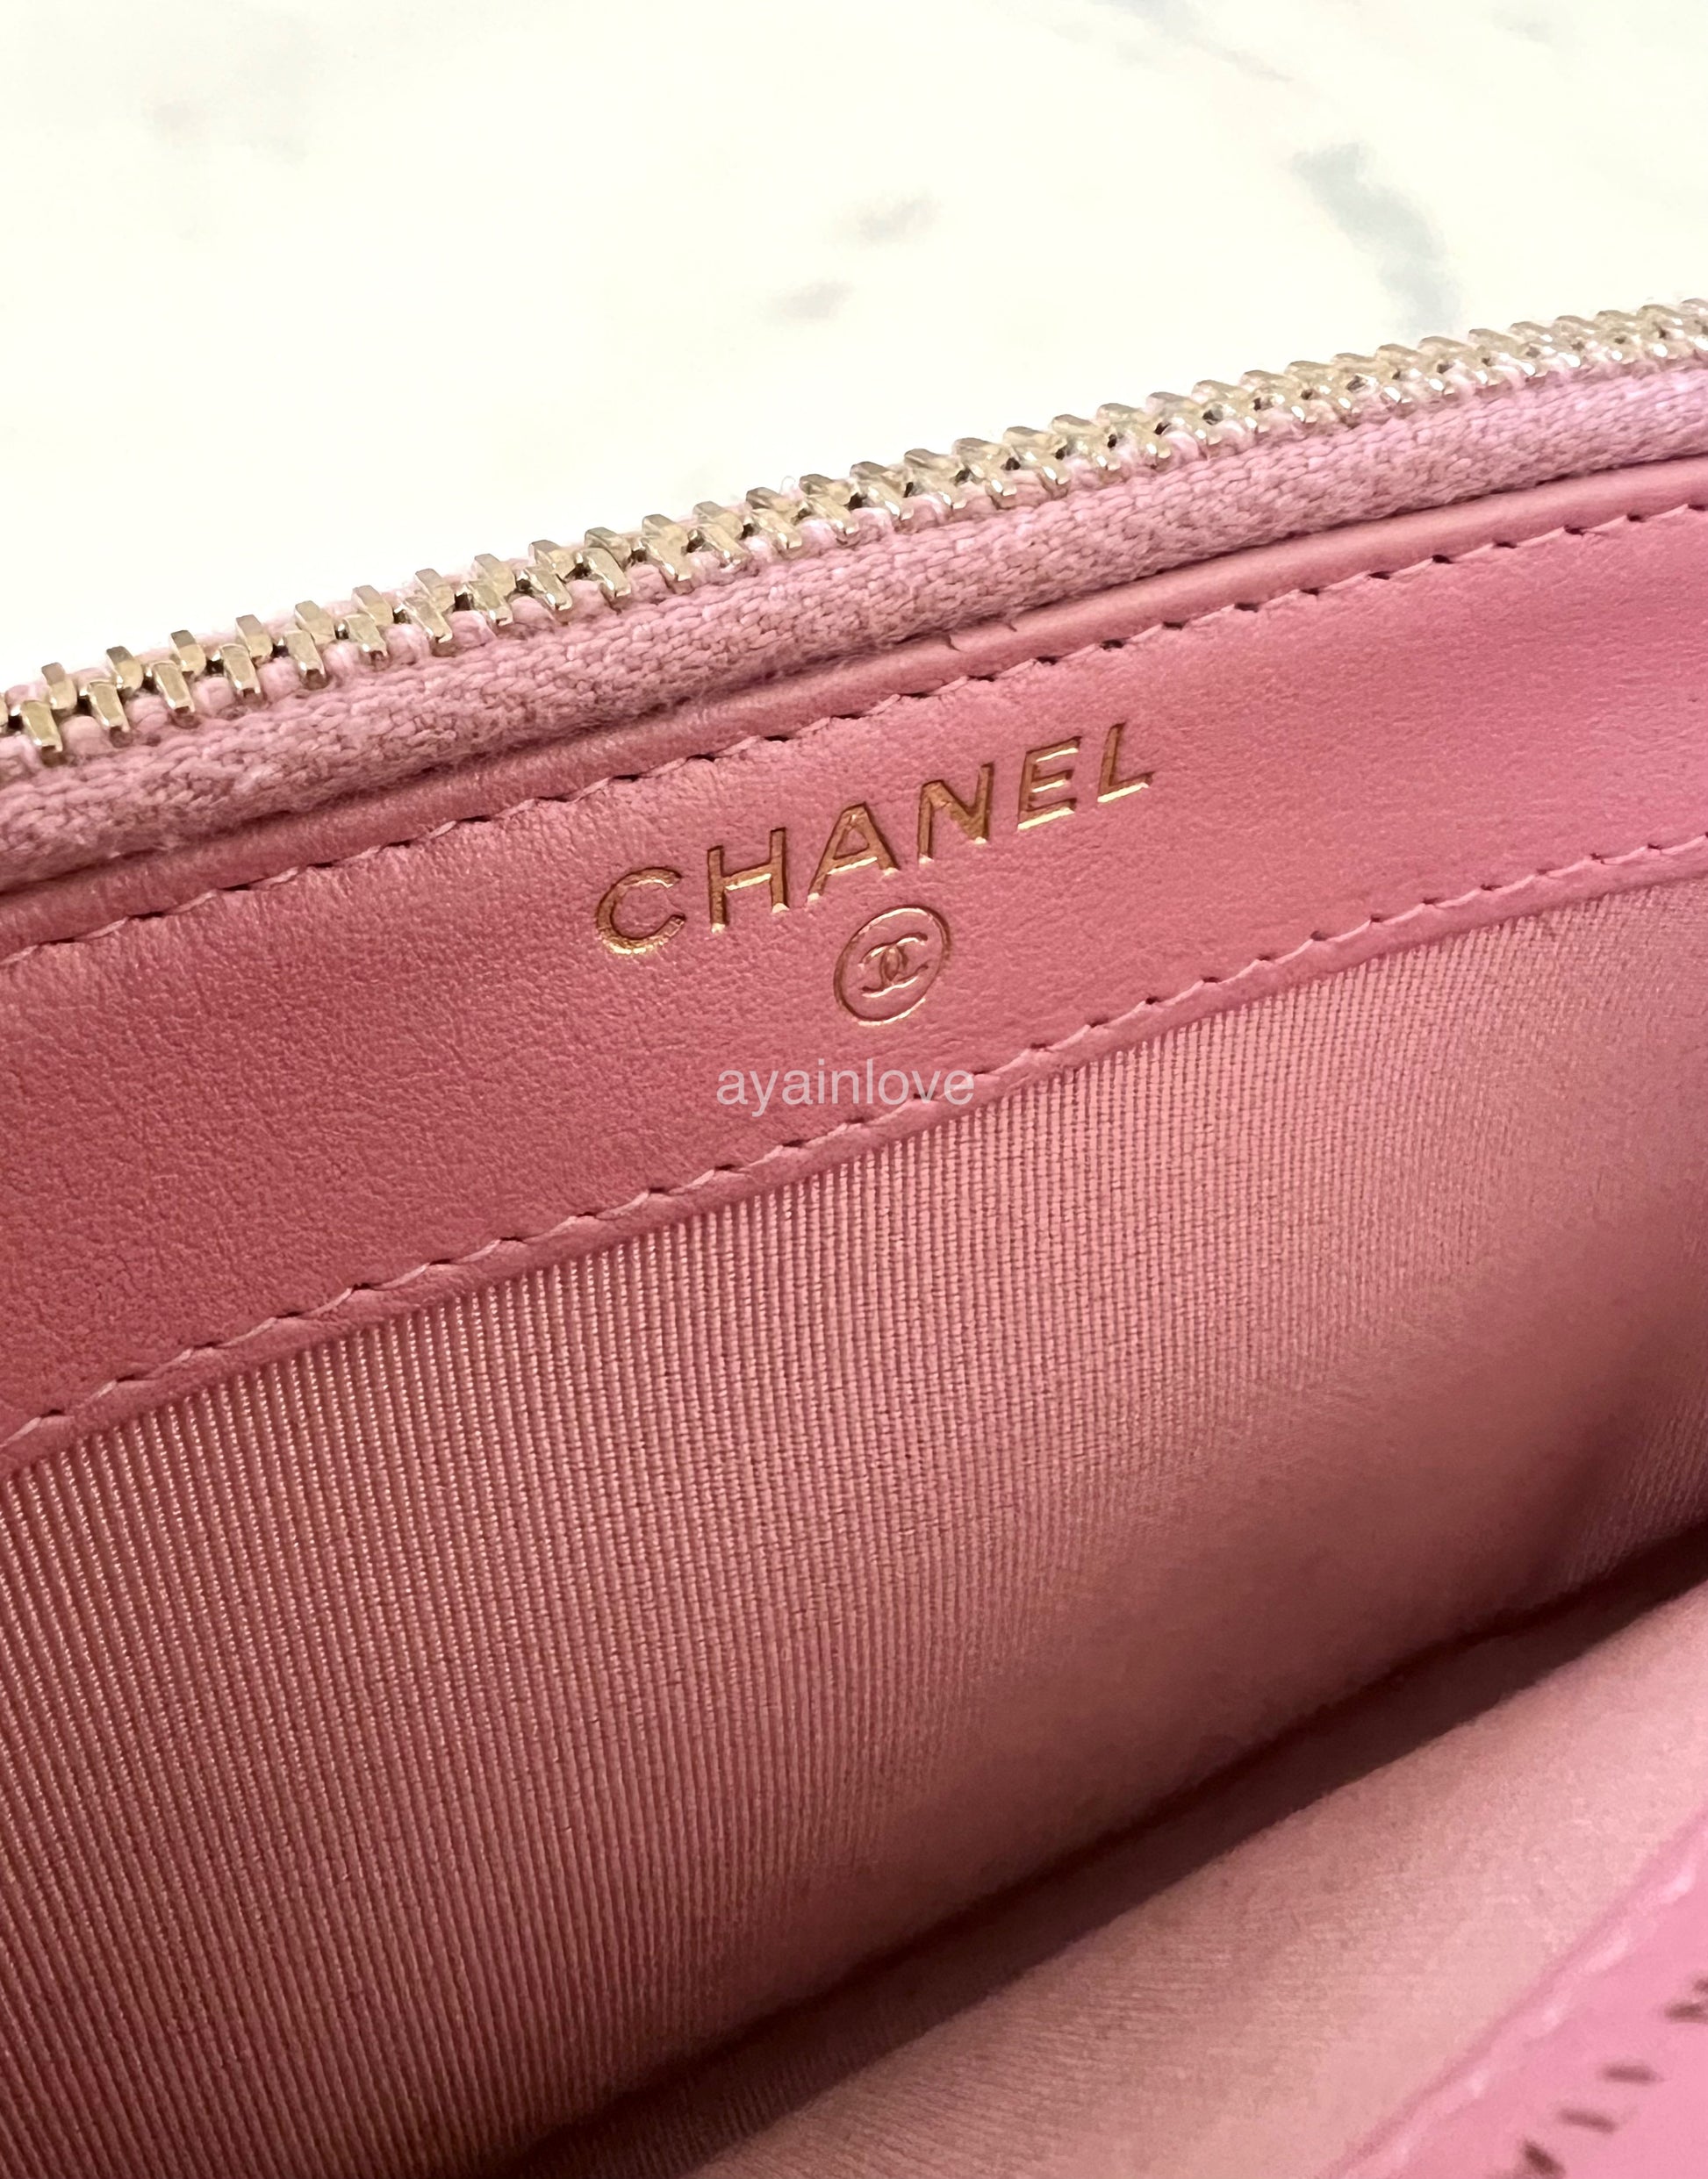 chanel coin purse red leather